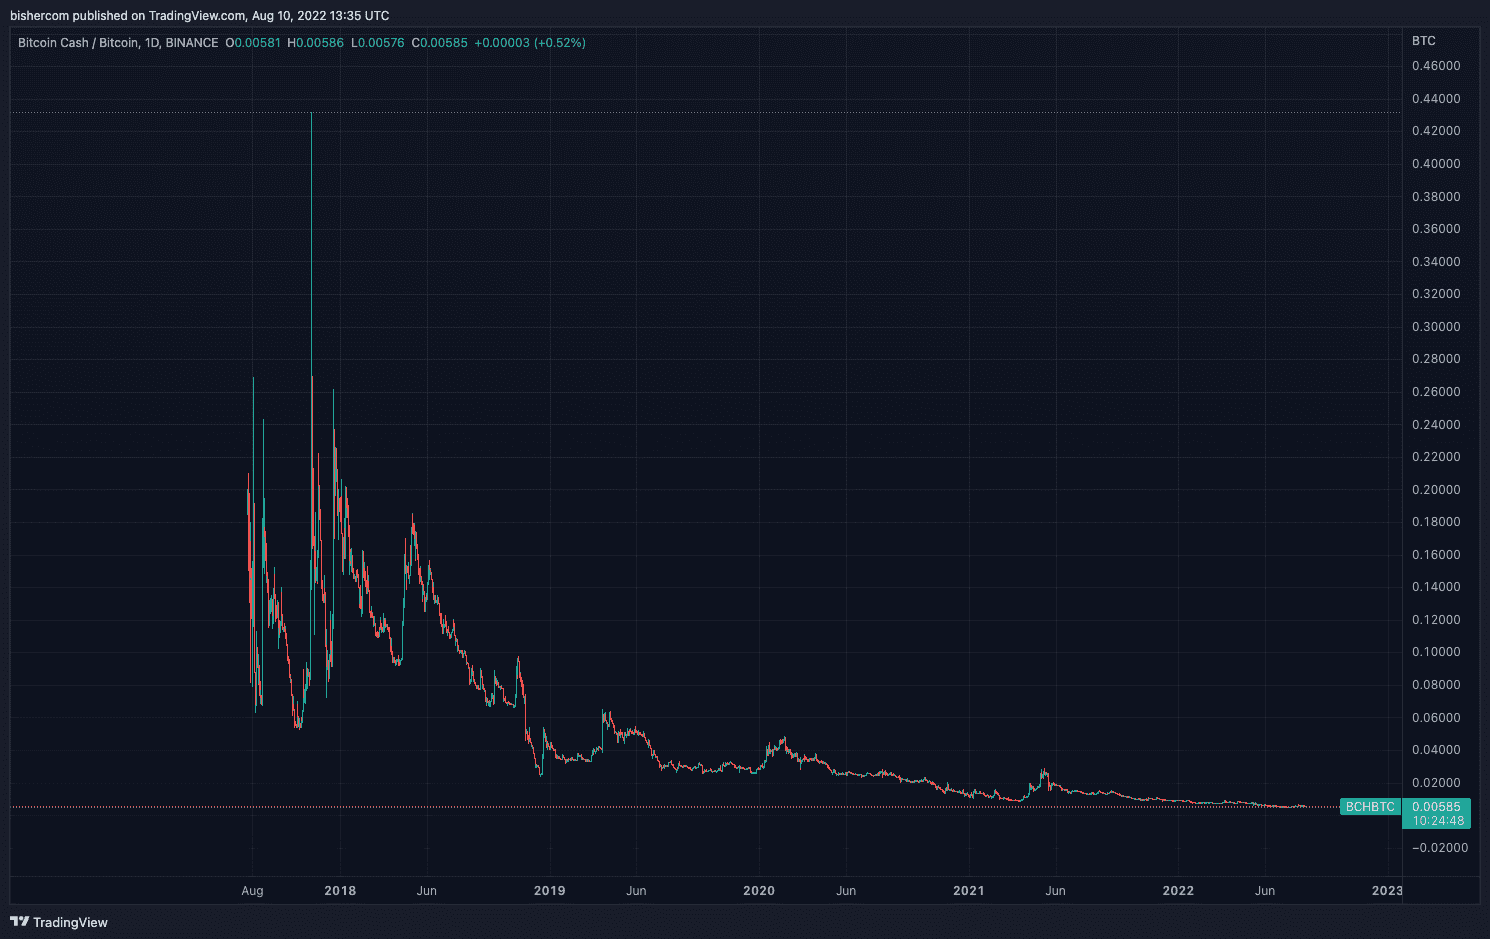 Bitcoin Cash paired against Bitcoin showing its price action over the last 5 years showing that it has gone down and weakened 